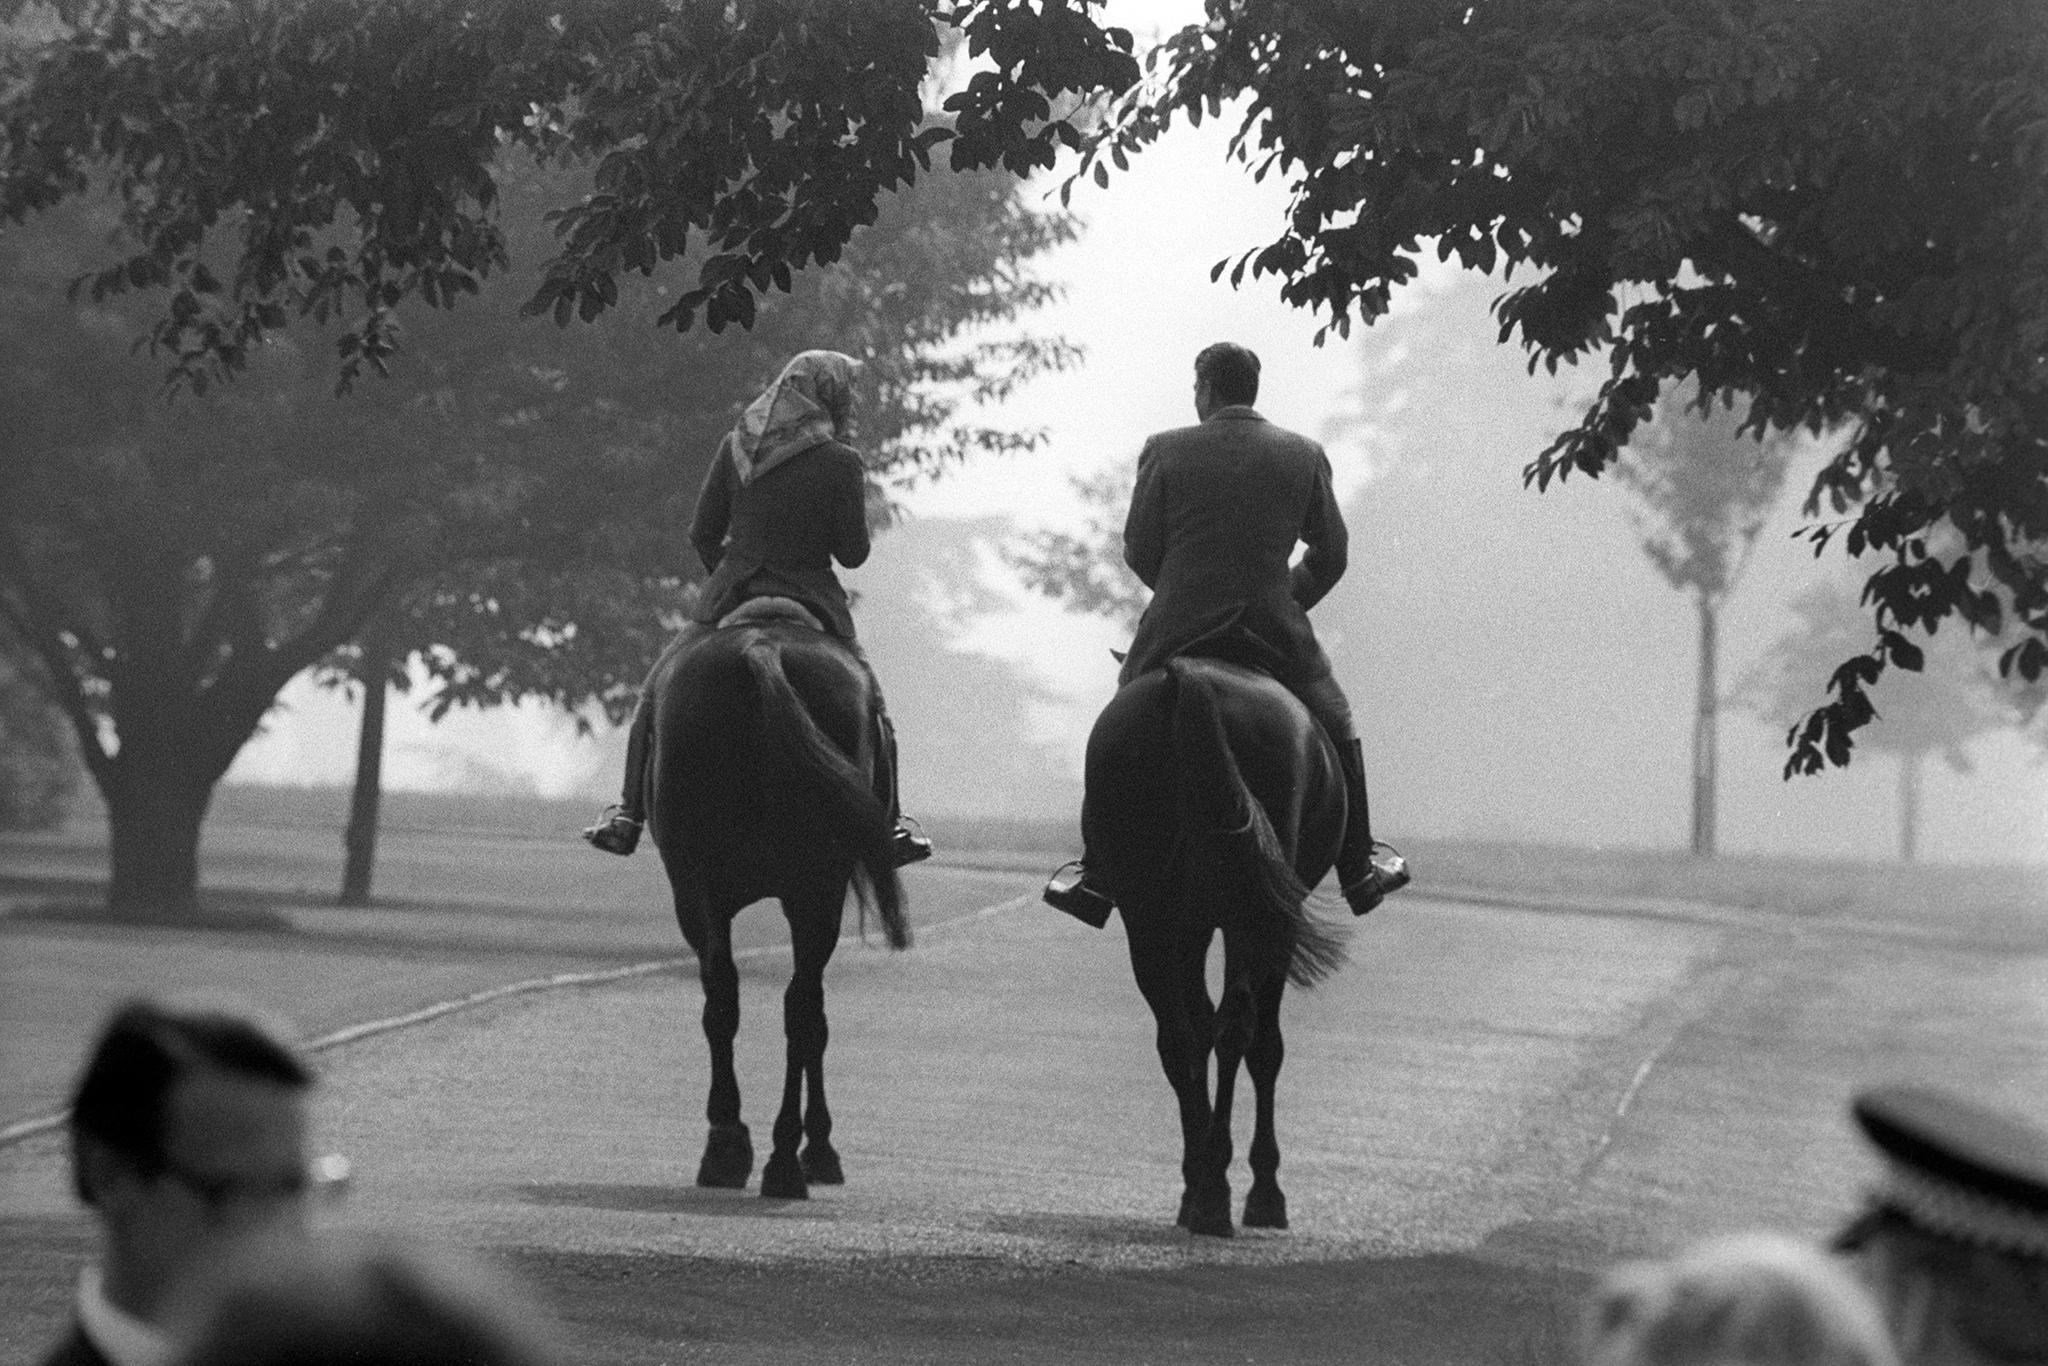 Queen Elizabeth and President Reagan out riding in Windsor Home Park in June 1982